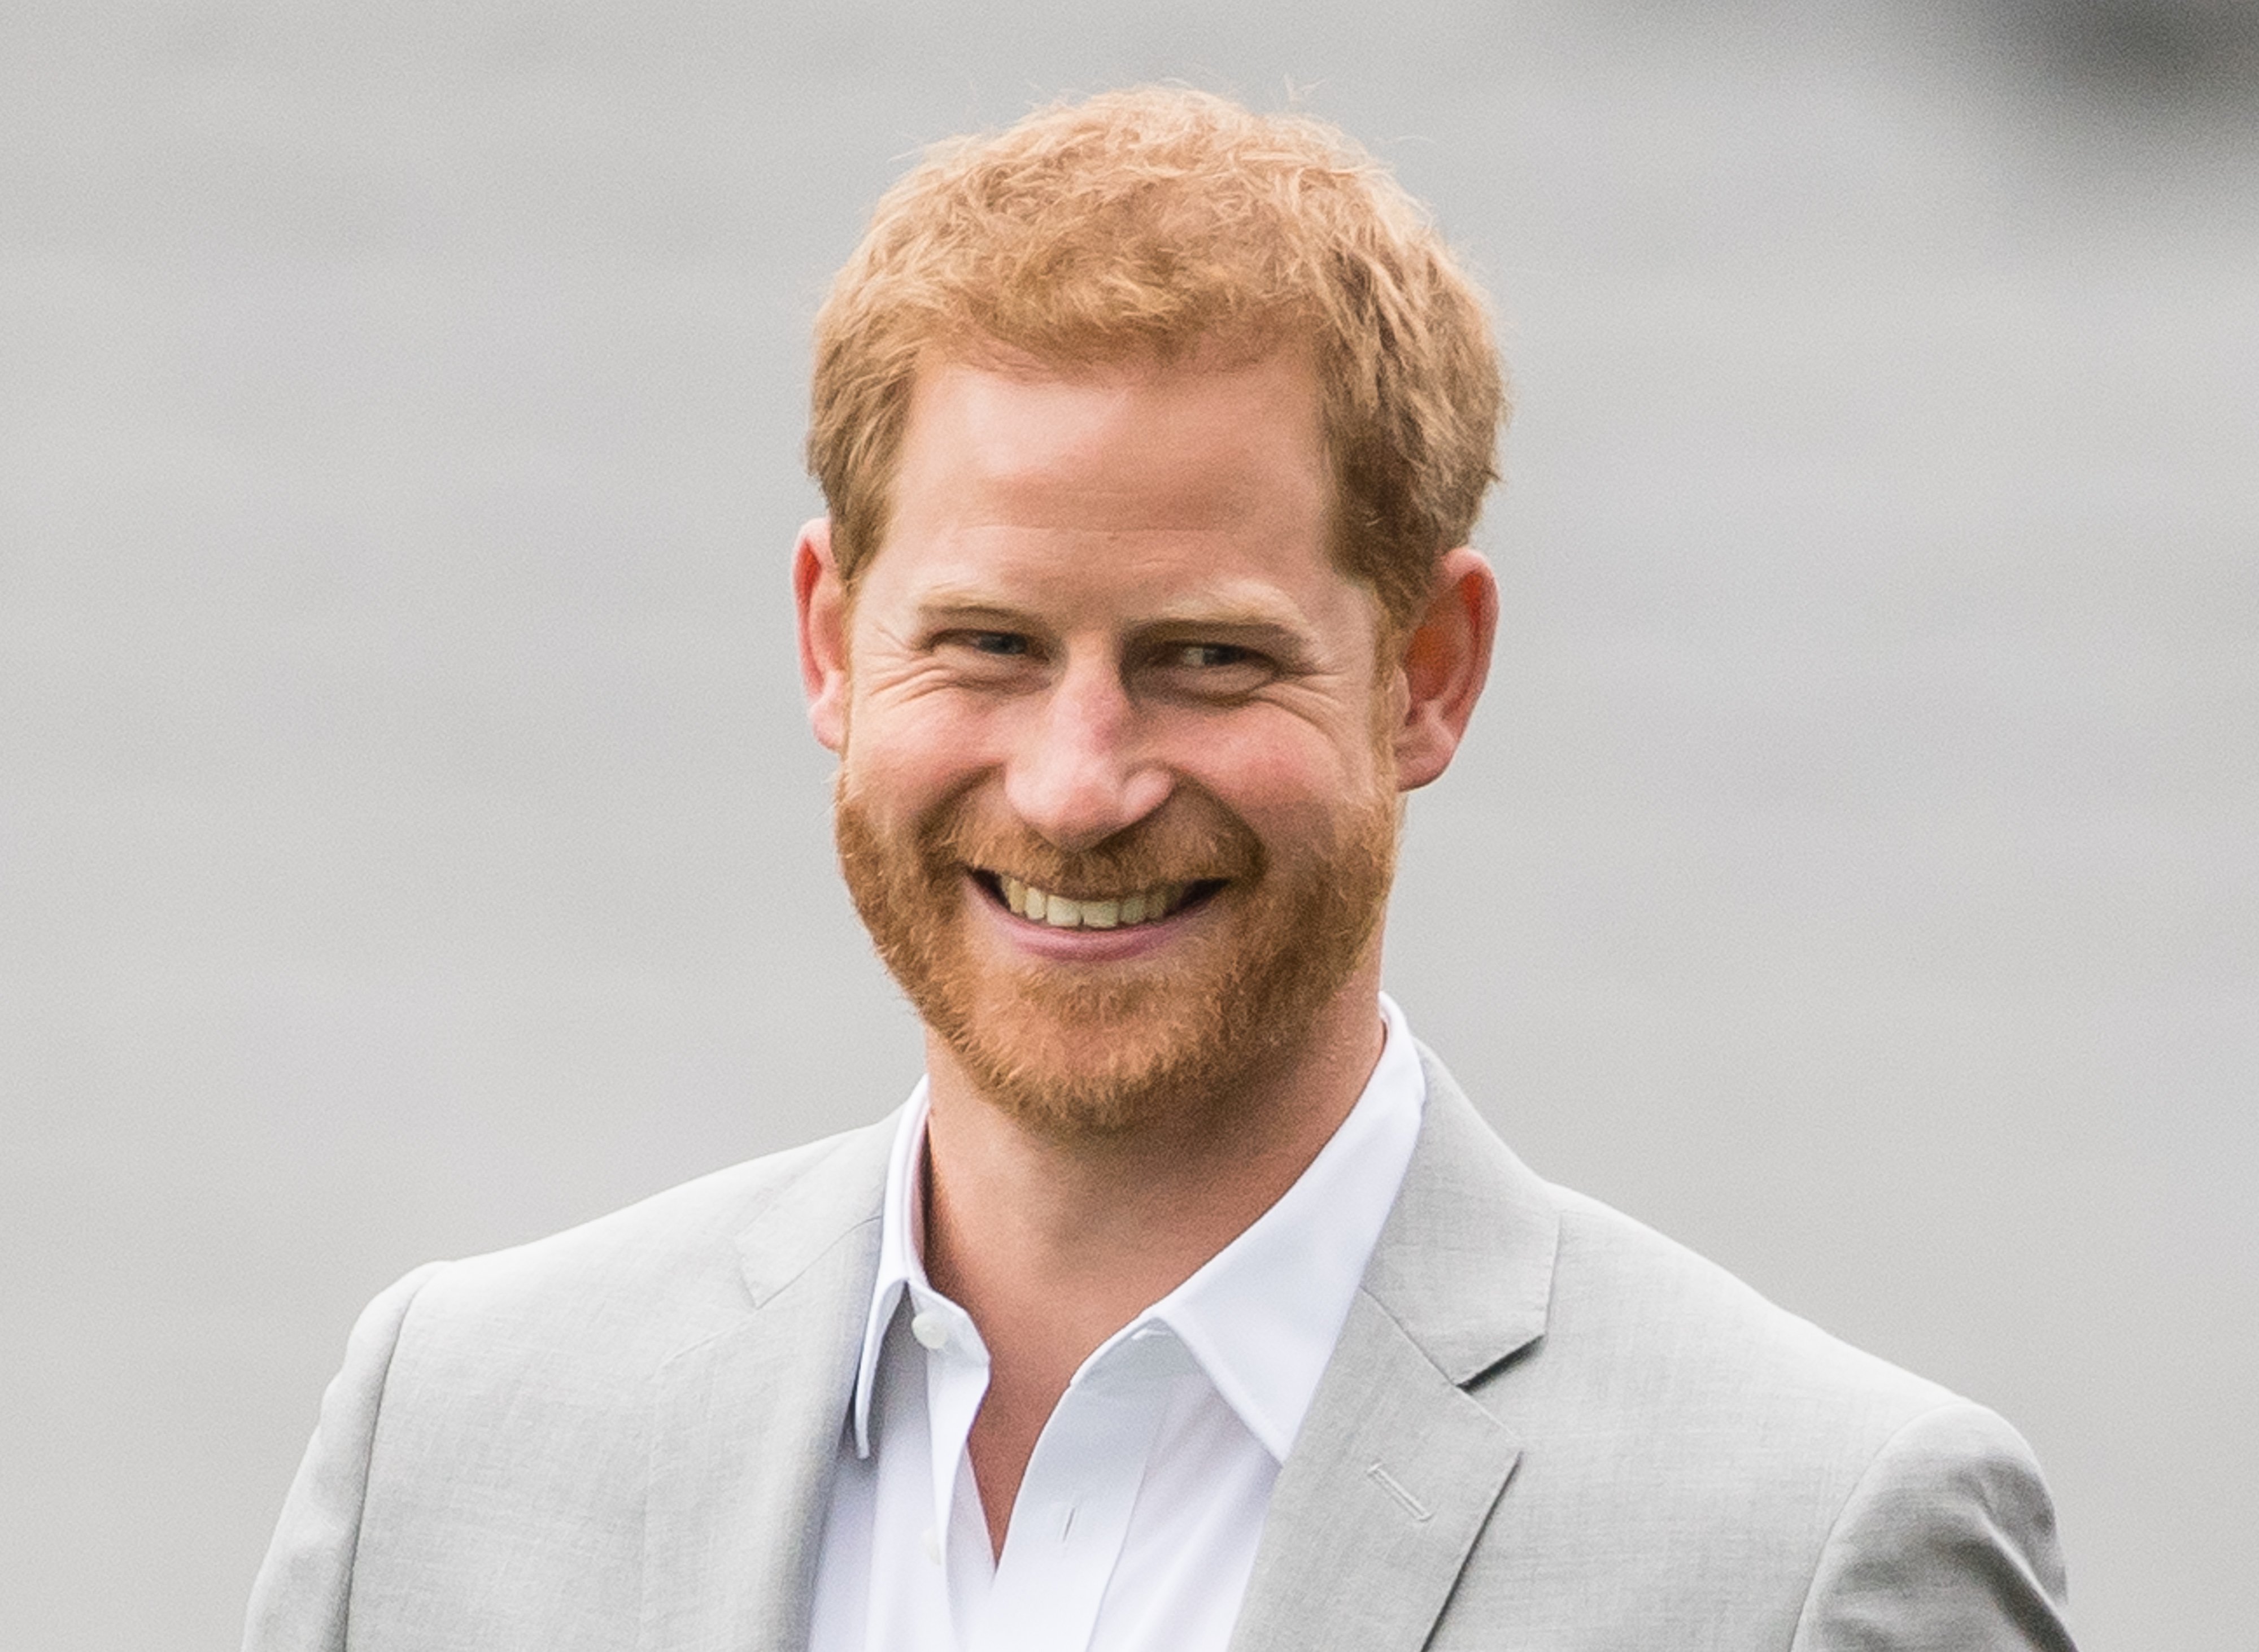 Prince Harry, Duke of Sussex visits Croke Park, home of Ireland's largest sporting organisation, the Gaelic Athletic Association on July 11, 2018 in Dublin, Ireland.| Source: Getty Images